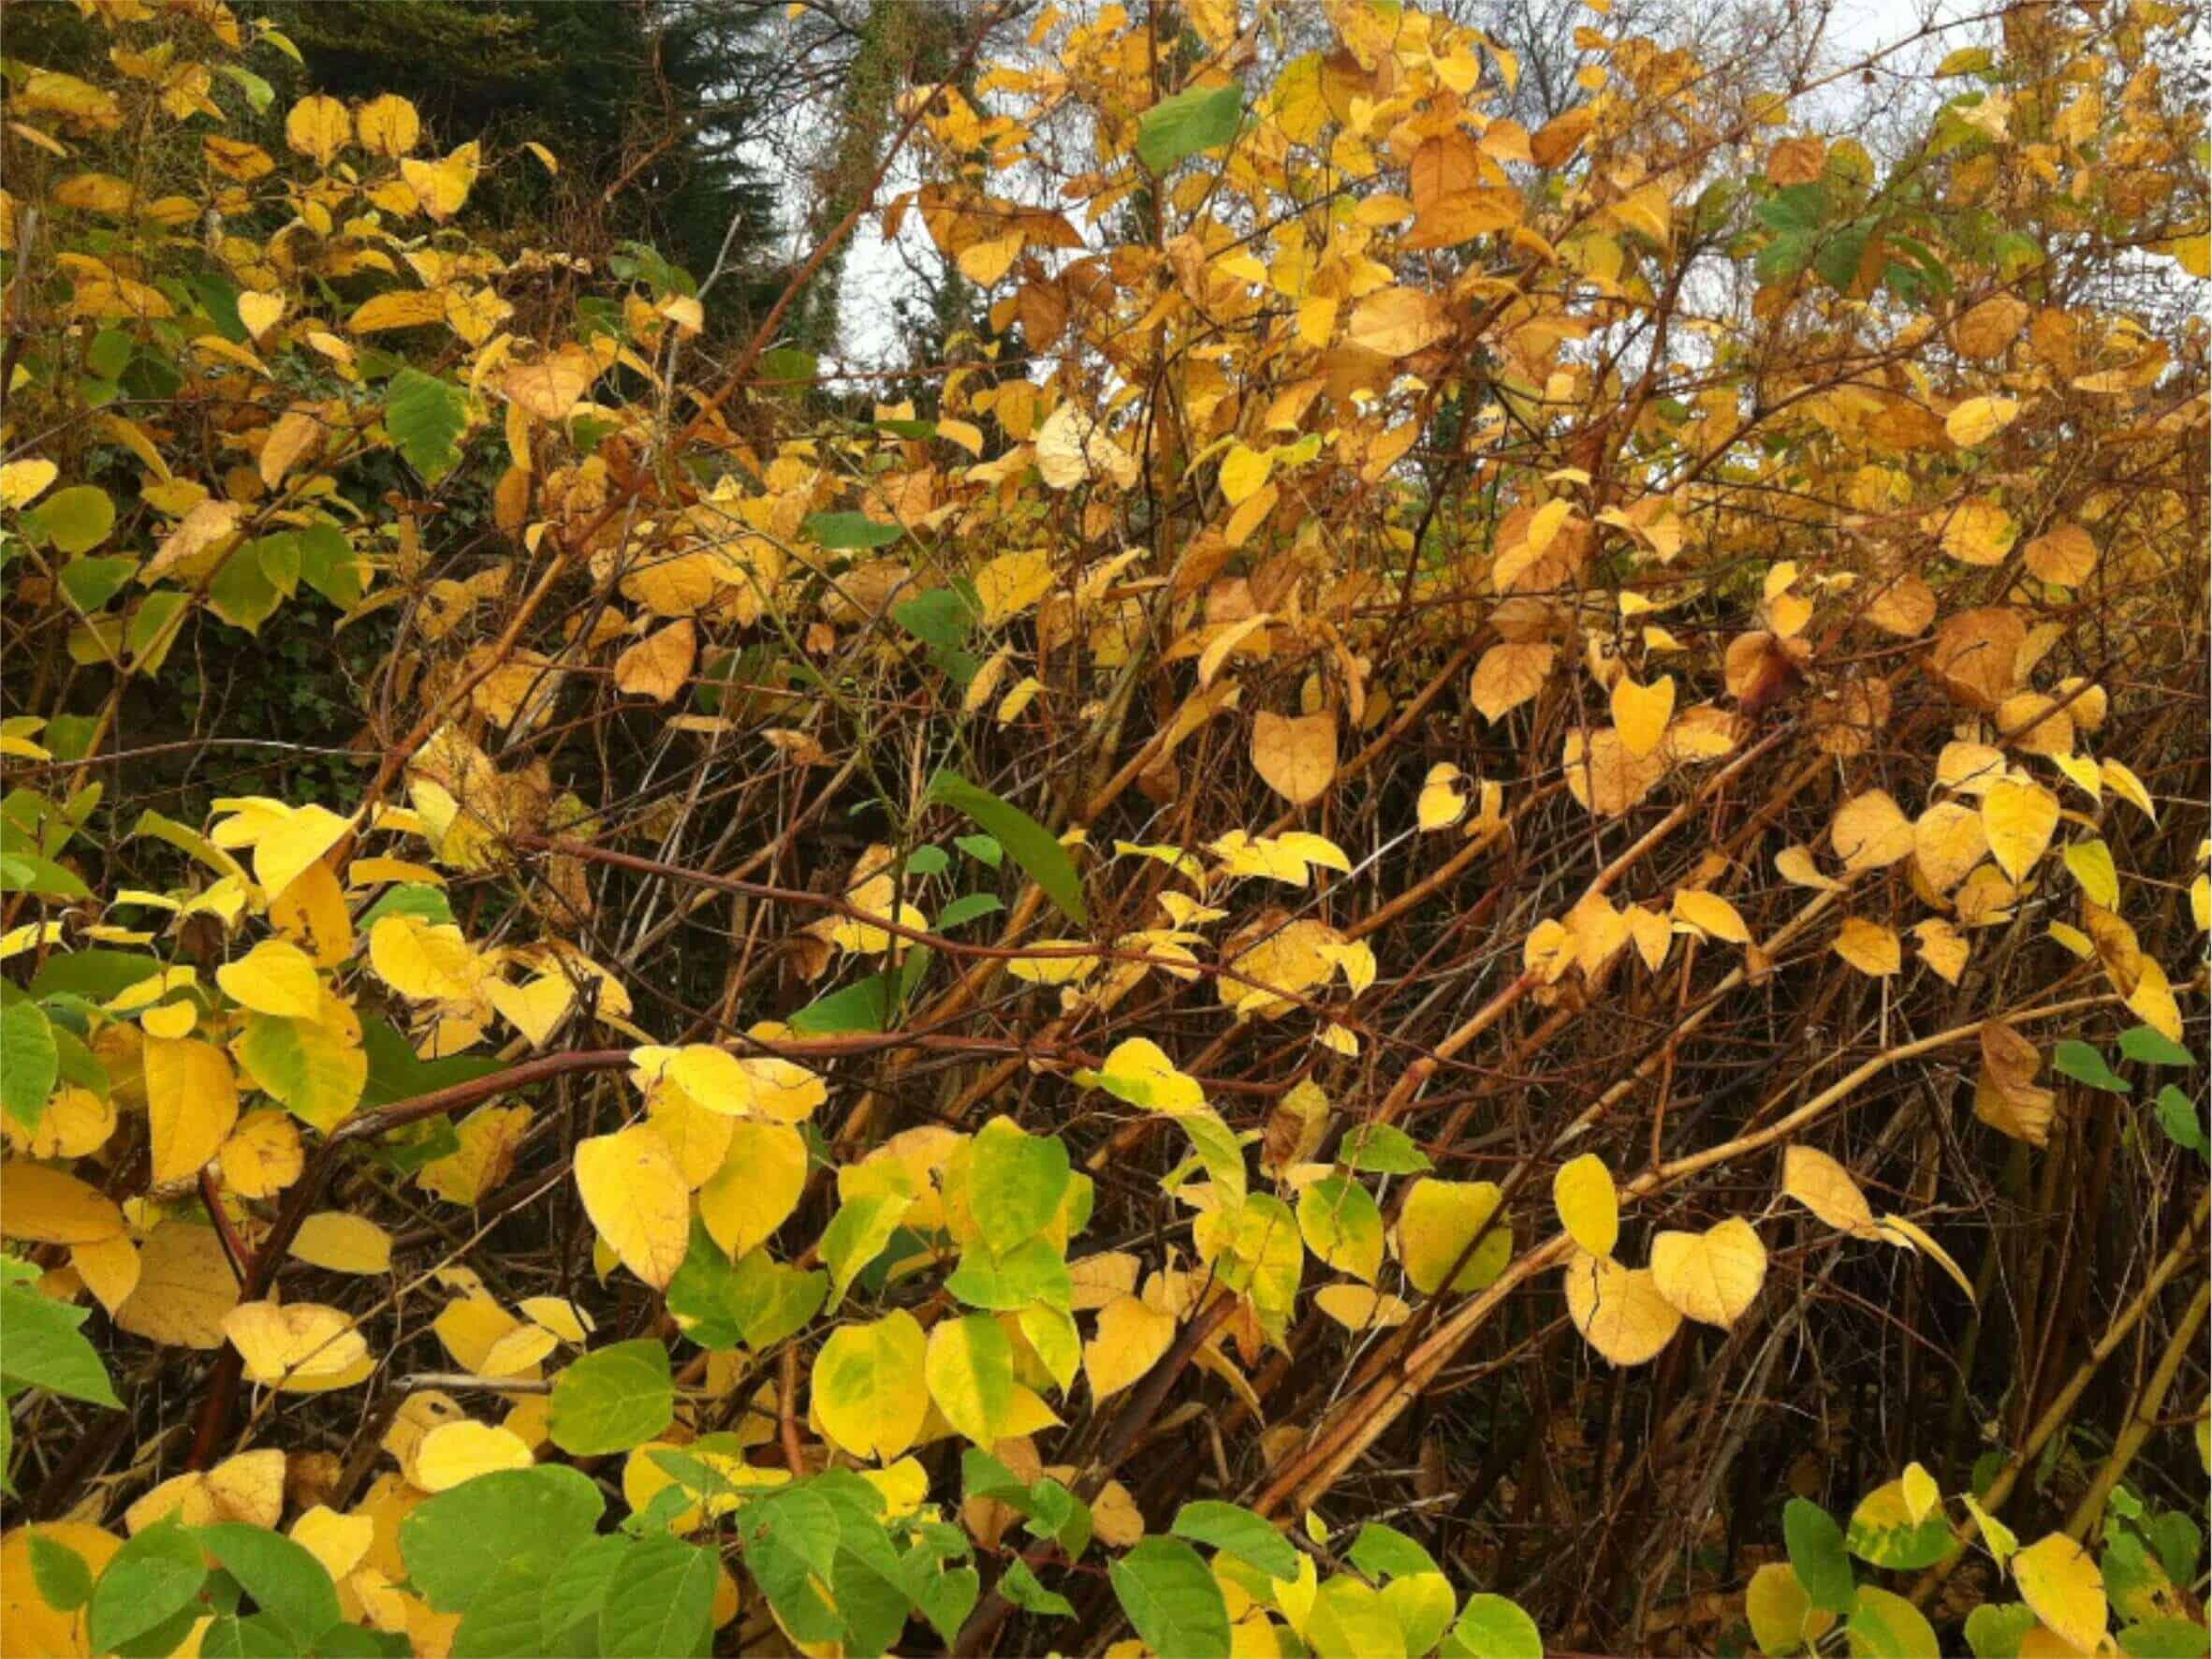 Japanese Knotweed leaves dying in Autumn and turning yellow